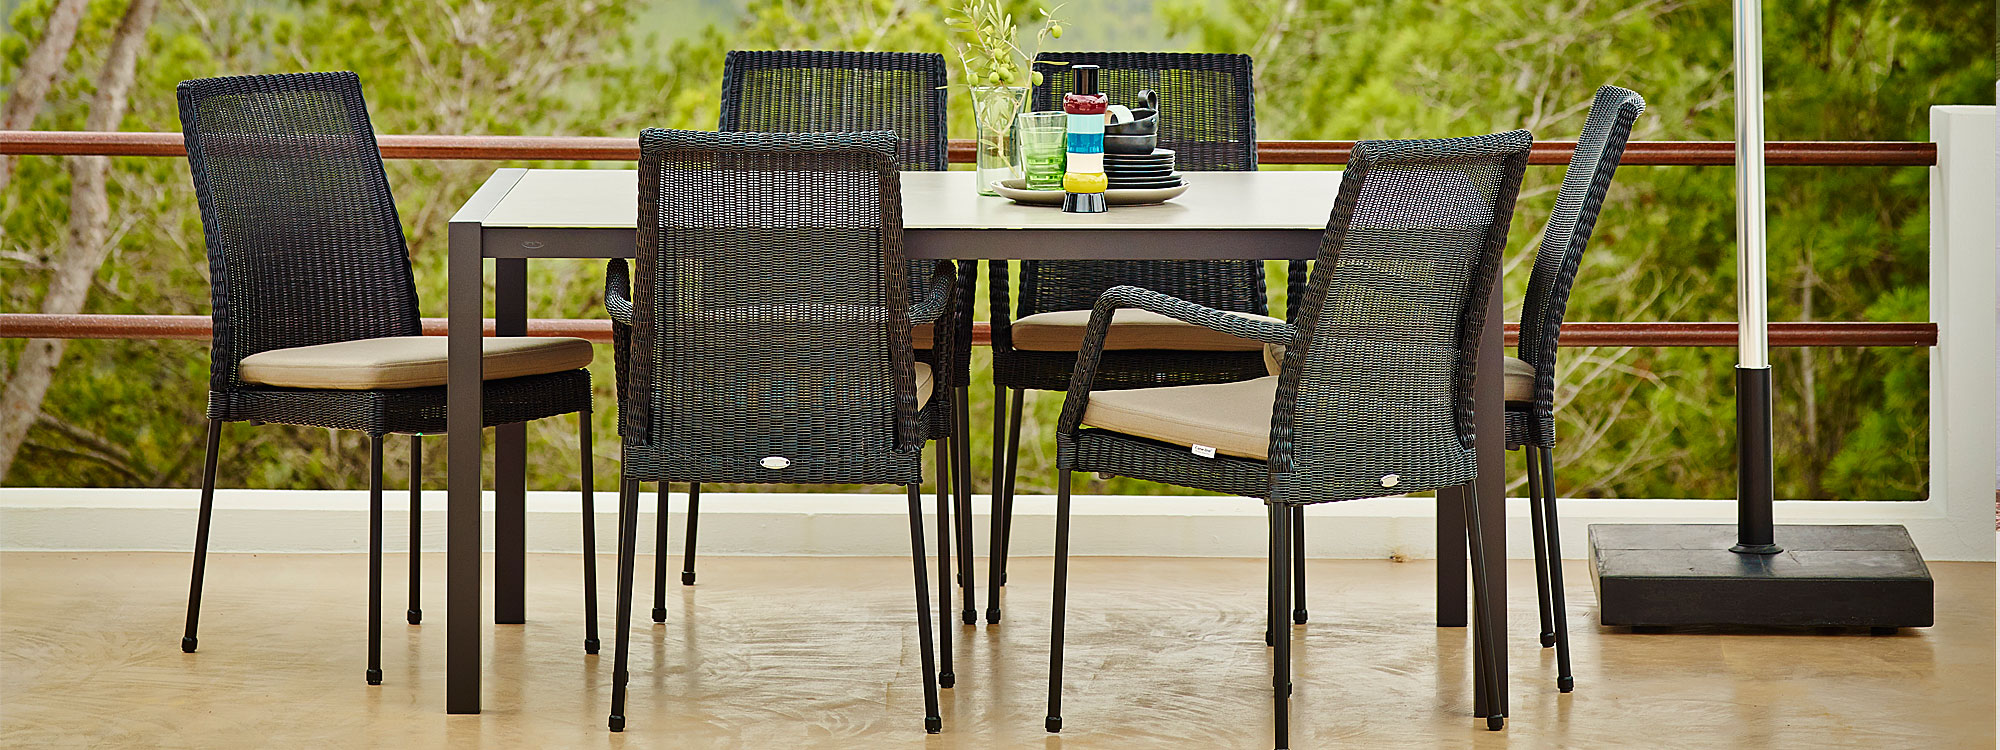 Newport rattan garden dining chair - all-weather dining chair is stackable, with or without arms by Cane-line high quality garden furniture